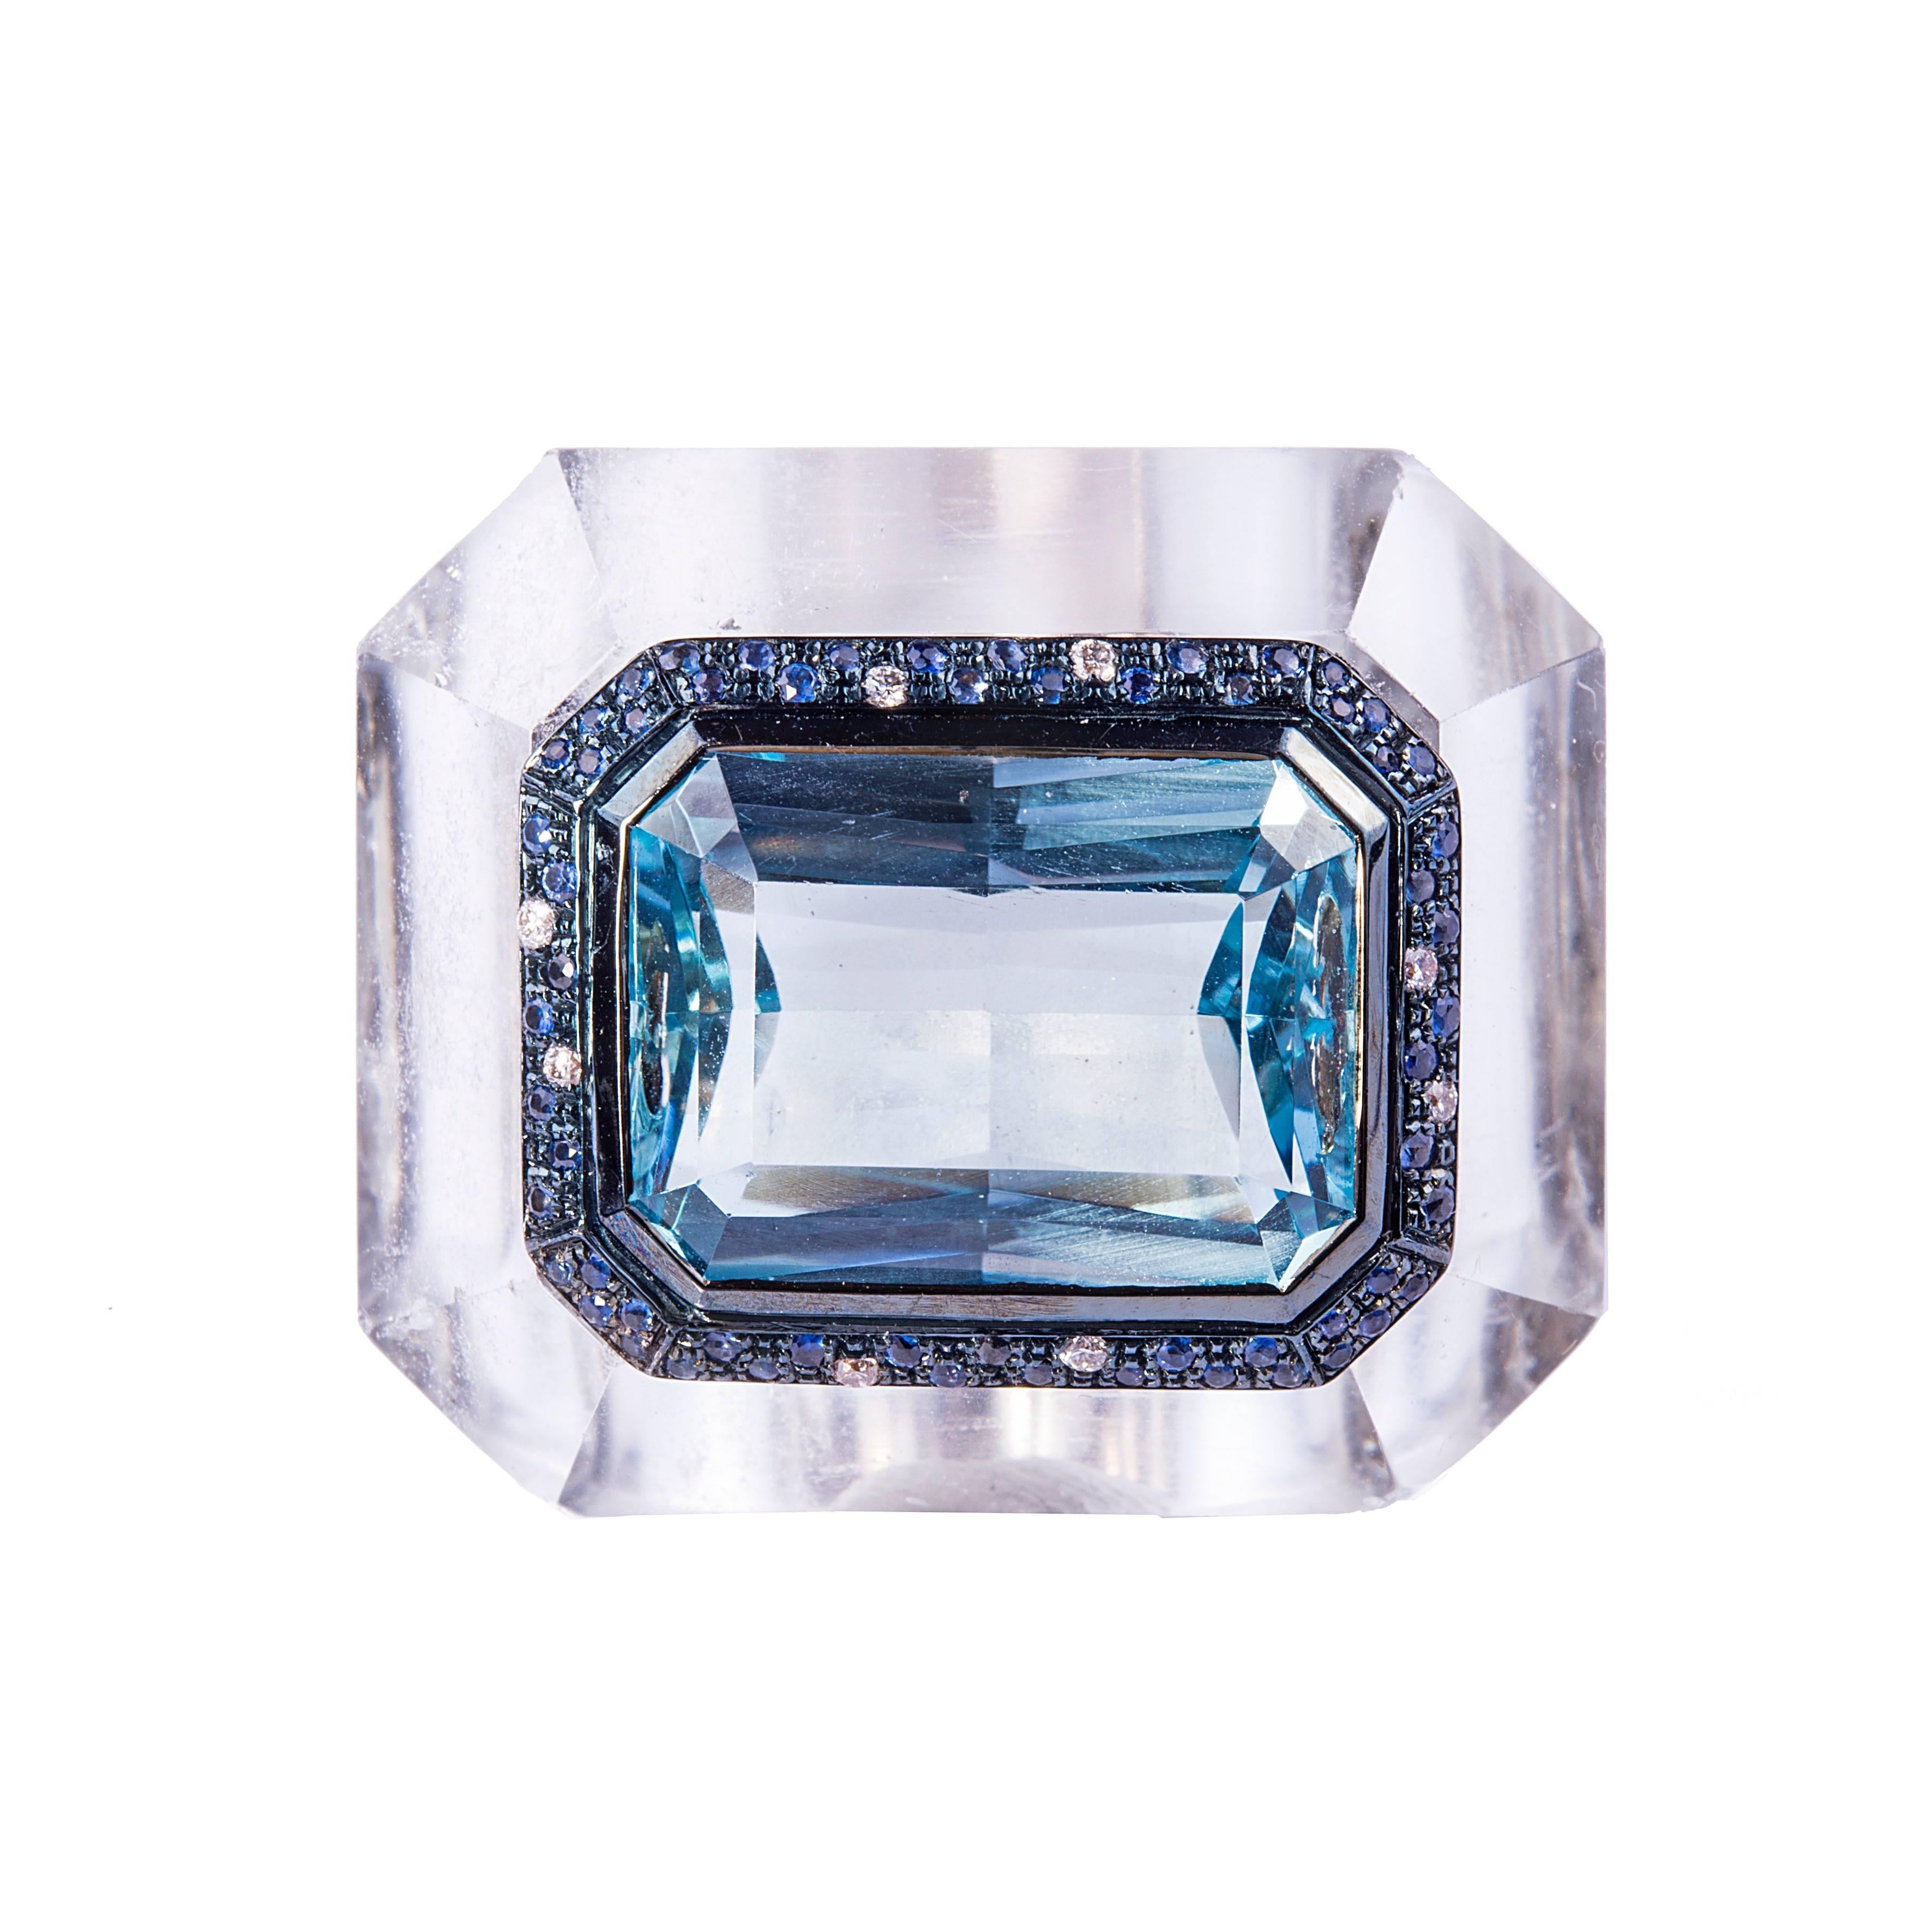 Nuur Collection - A 18kt gold and rock crystal ring featuring an aquamarine of 12 carat circa surrounded by 1.00 ct circa of sapphires and diamonds. The rock crystal was cut and carved by hand.